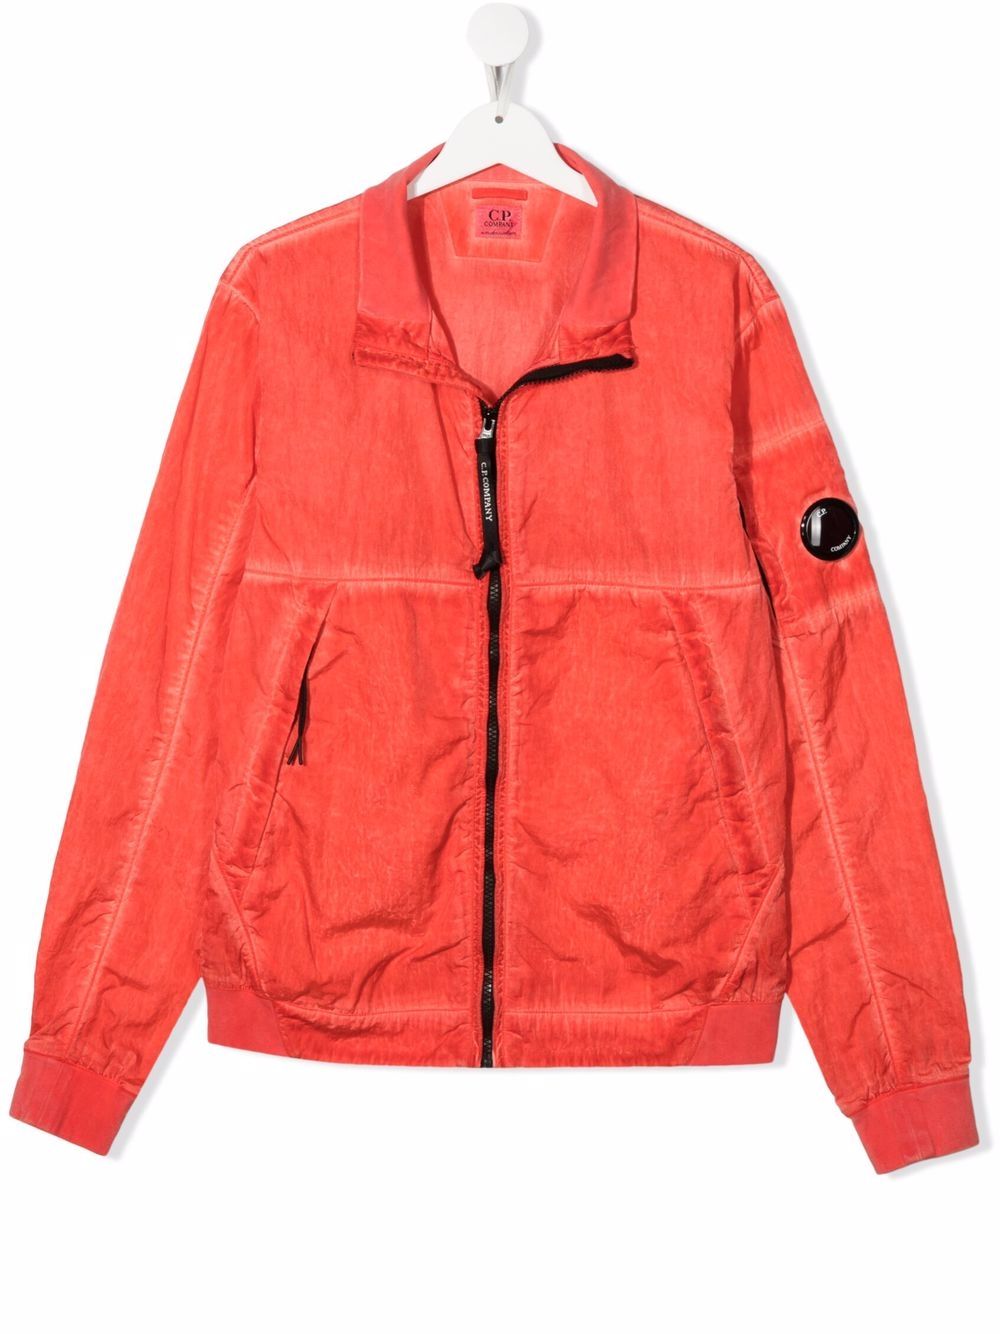 C.P. COMPANY KIDS Lightweight Jacket Coral Red